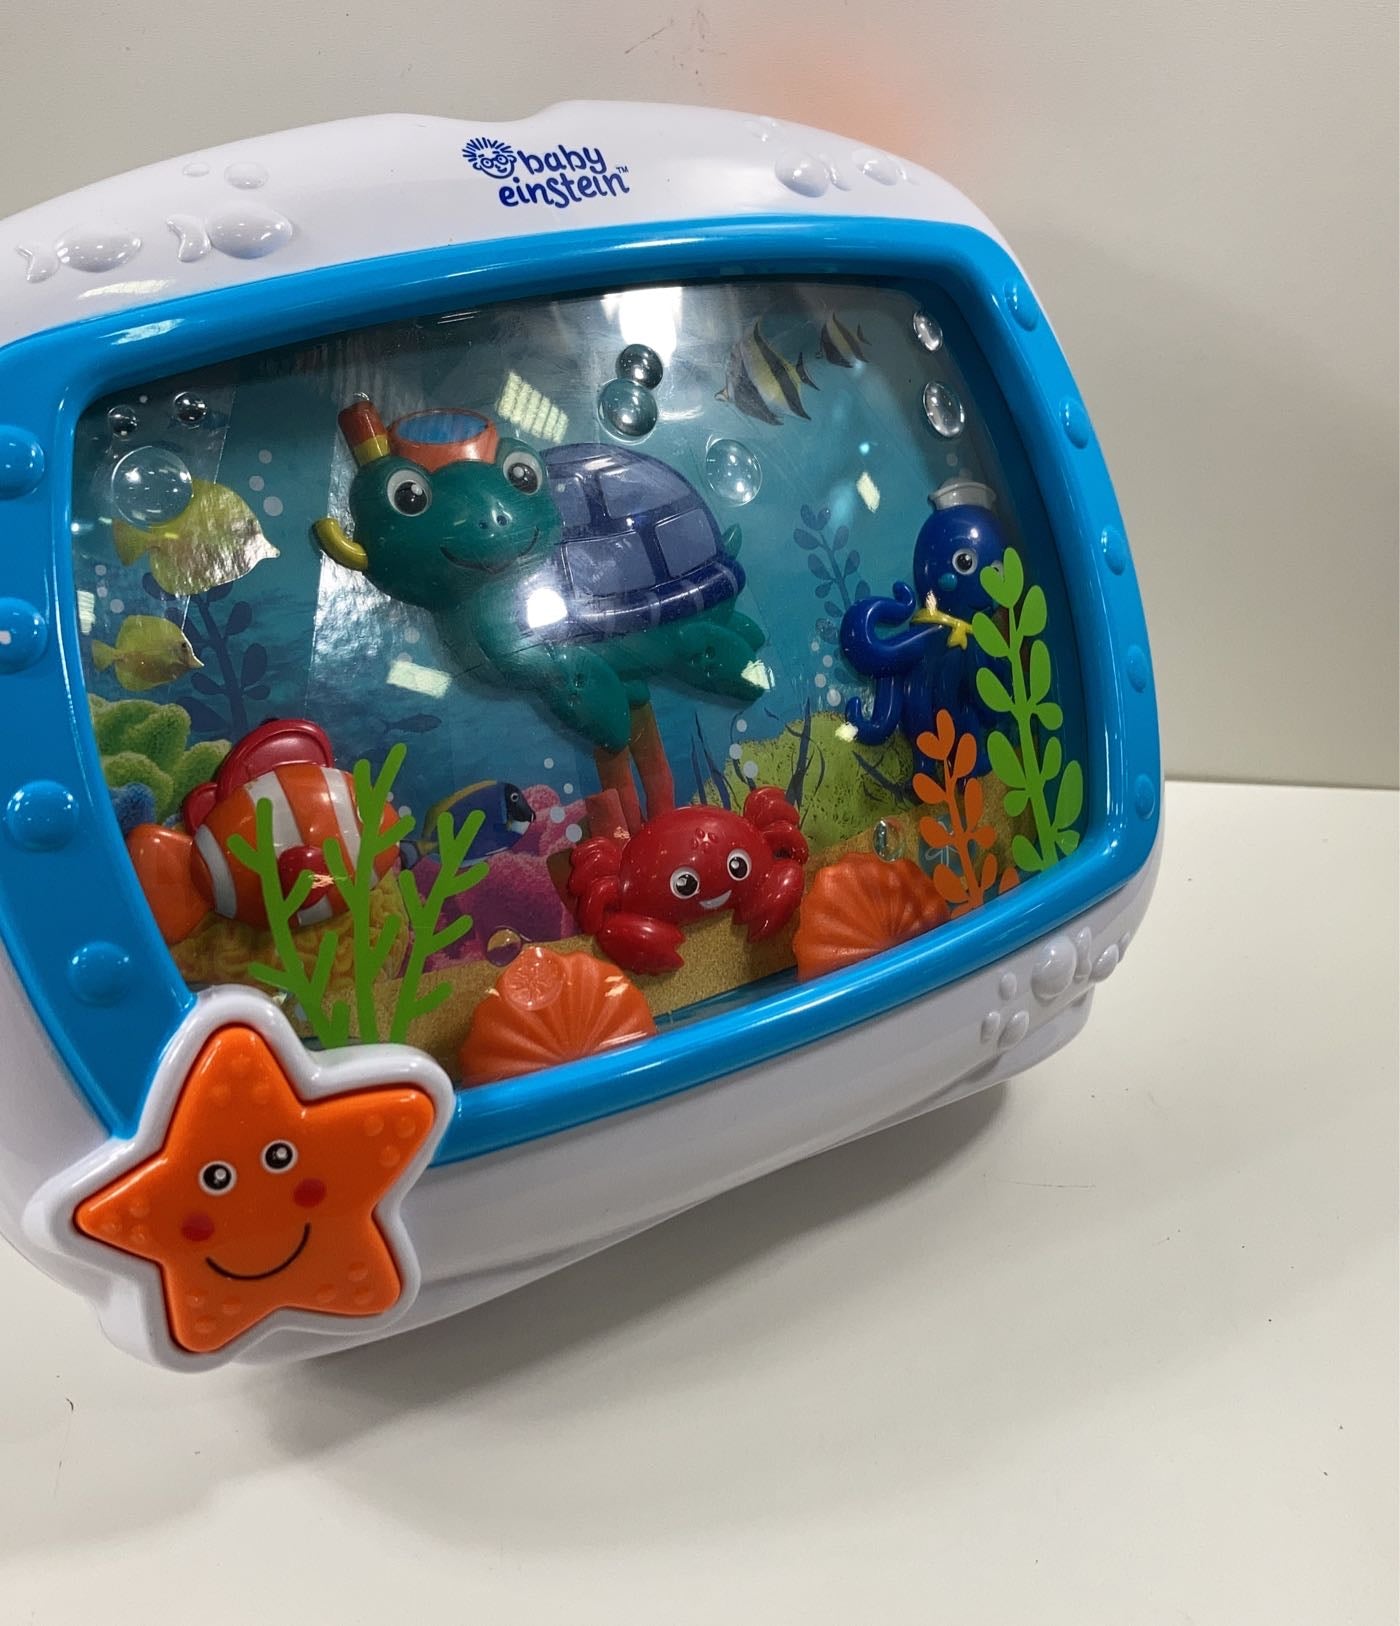 Baby Einstein Sea Dreams Soother Review 